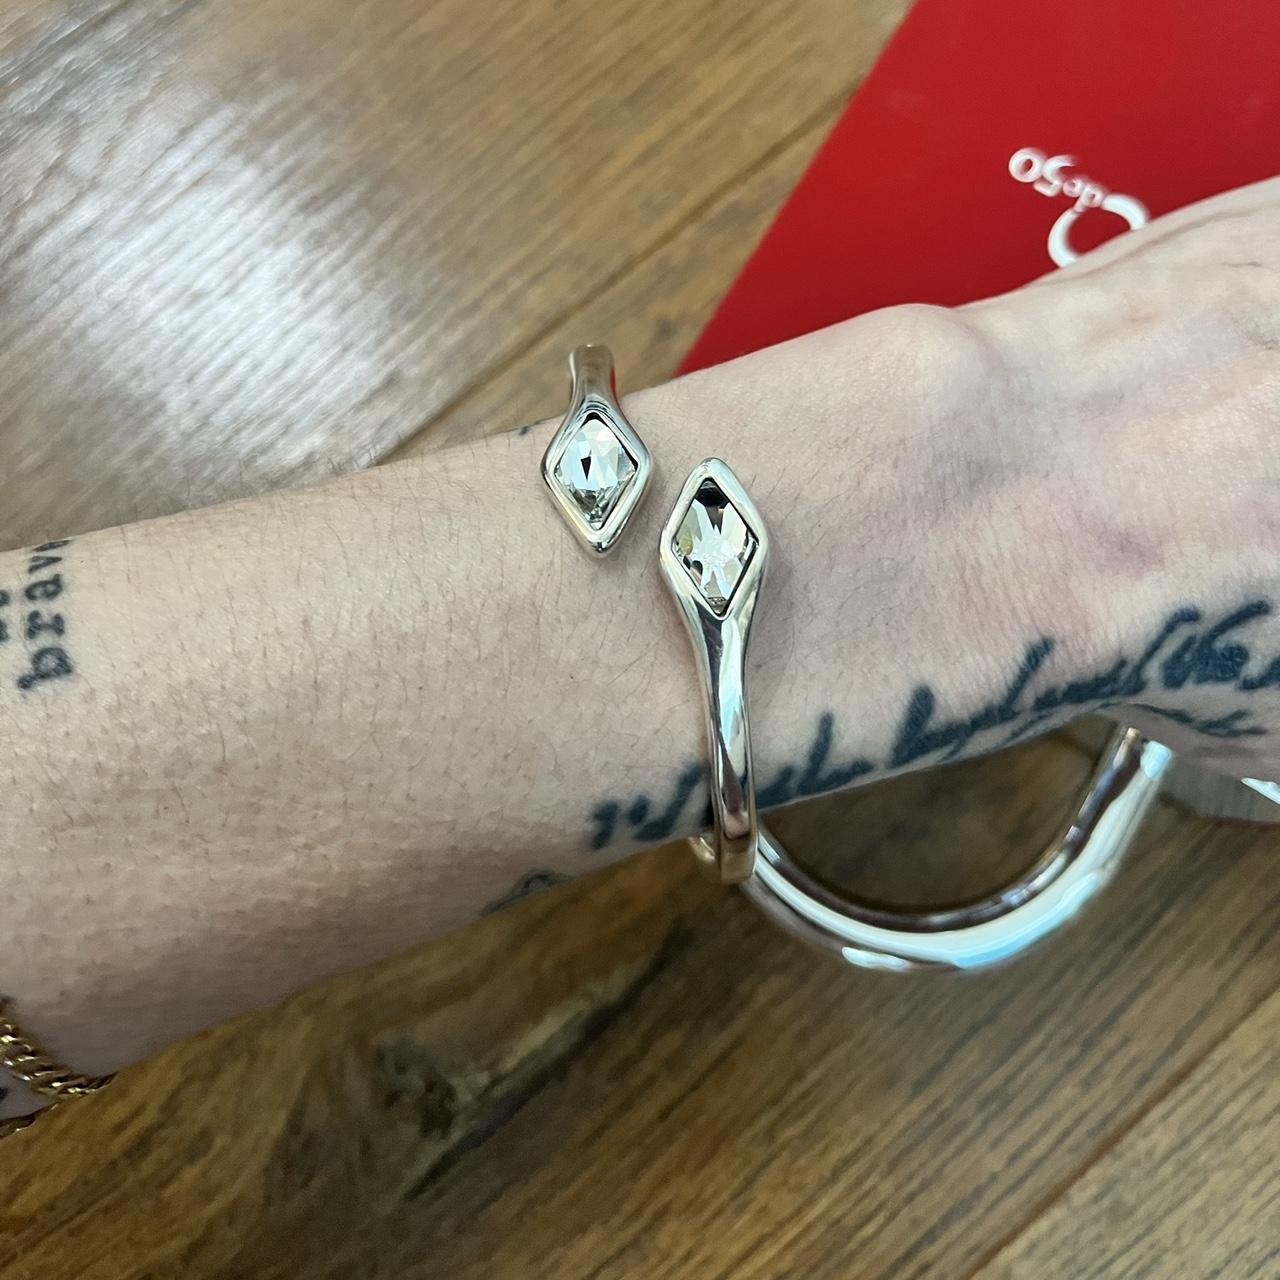 Uno de 50 charm bracelet. Acquired from a private - Depop